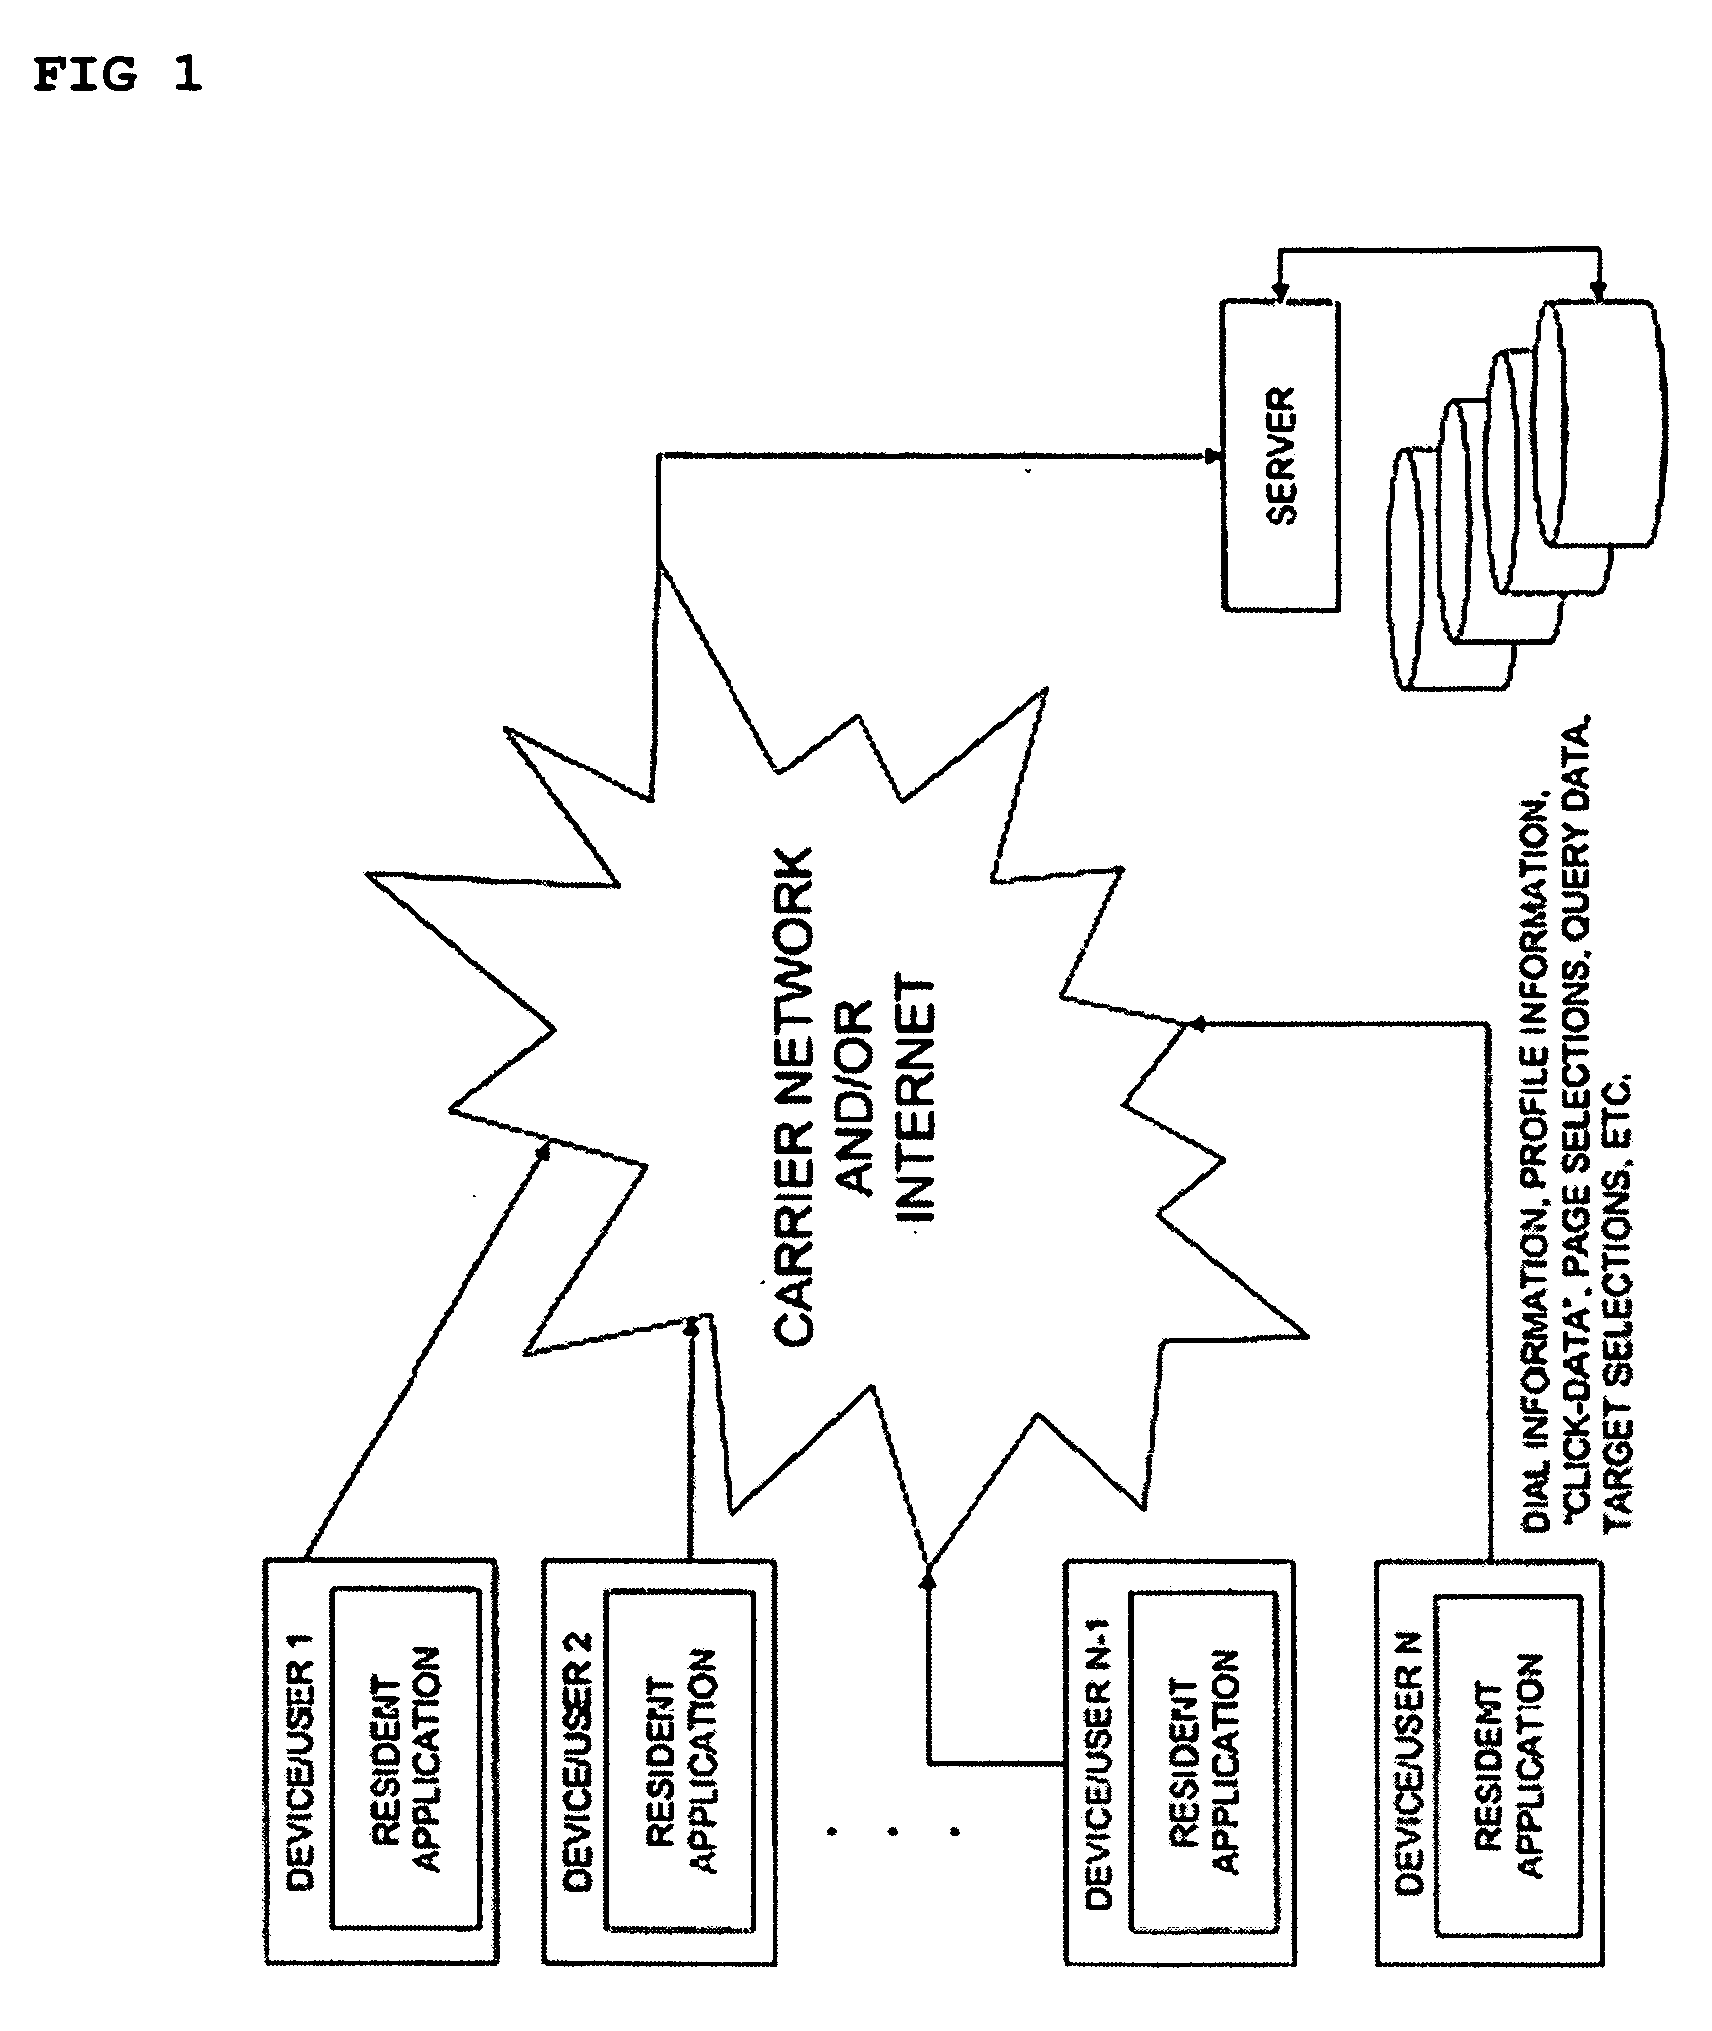 Systems and methods for aggregating telephony and internet data